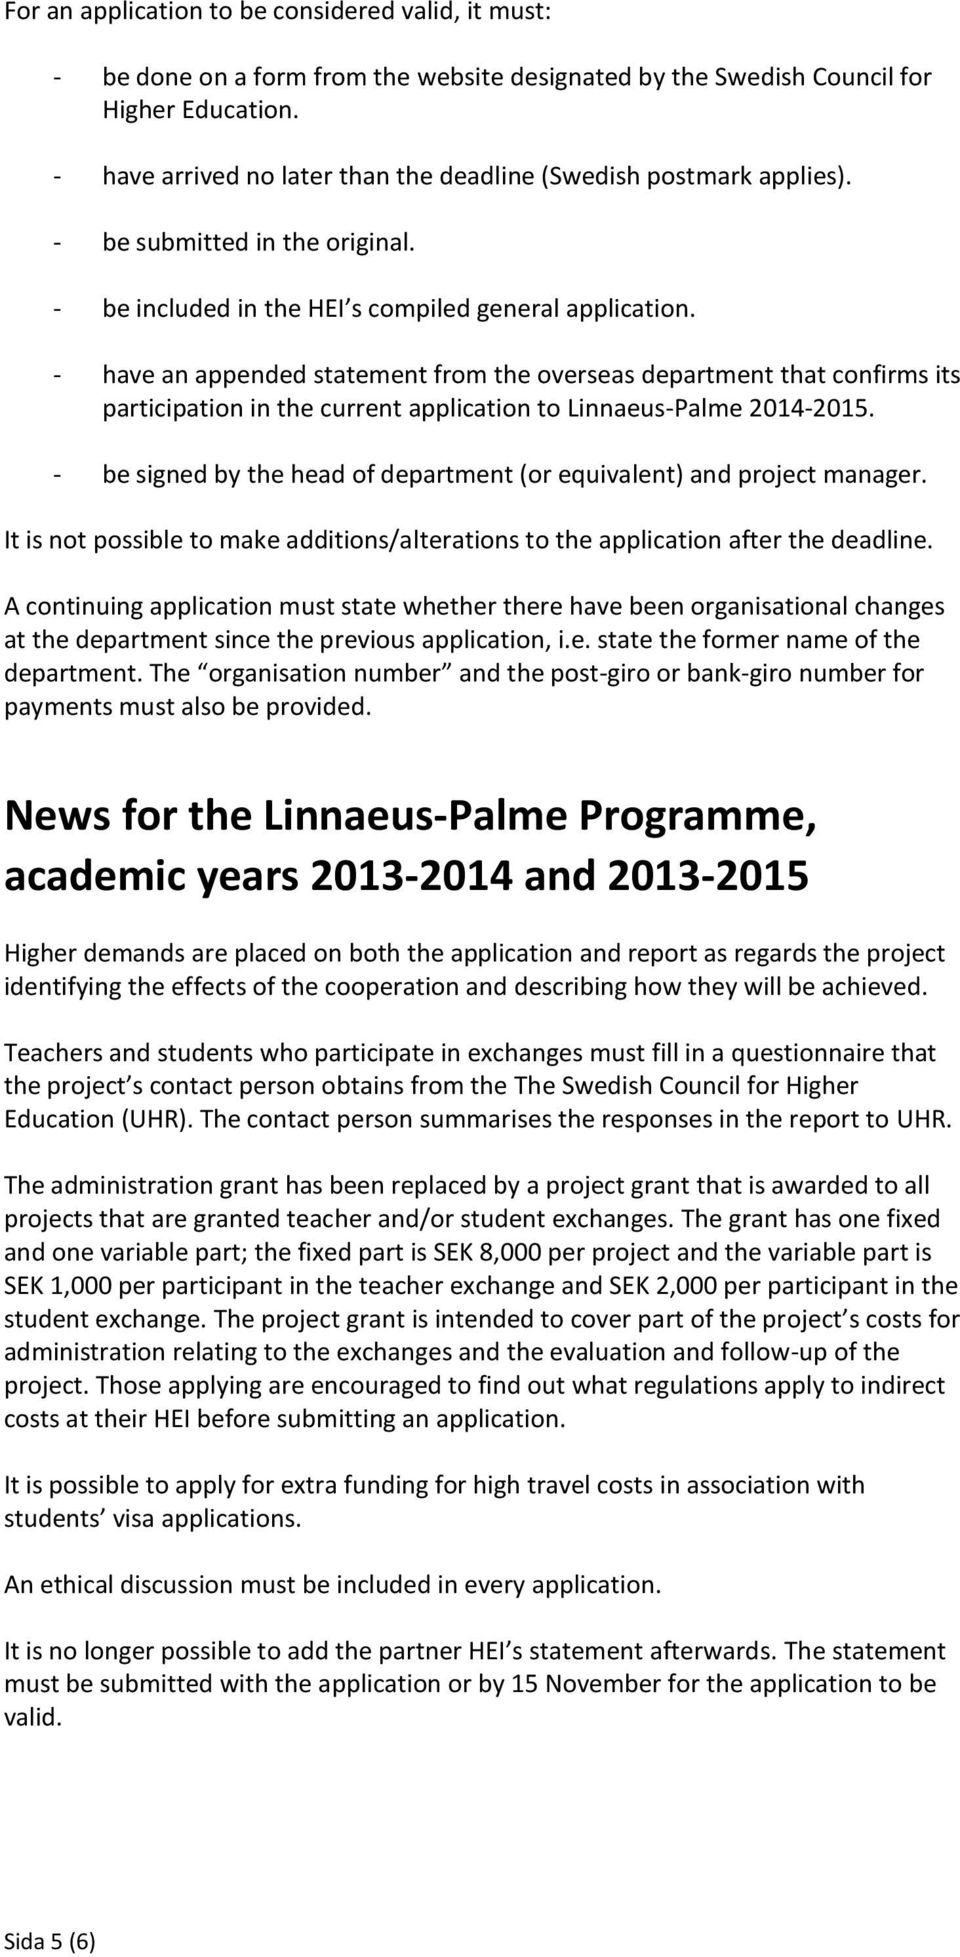 - have an appended statement from the overseas department that confirms its participation in the current application to Linnaeus-Palme 2014-2015.